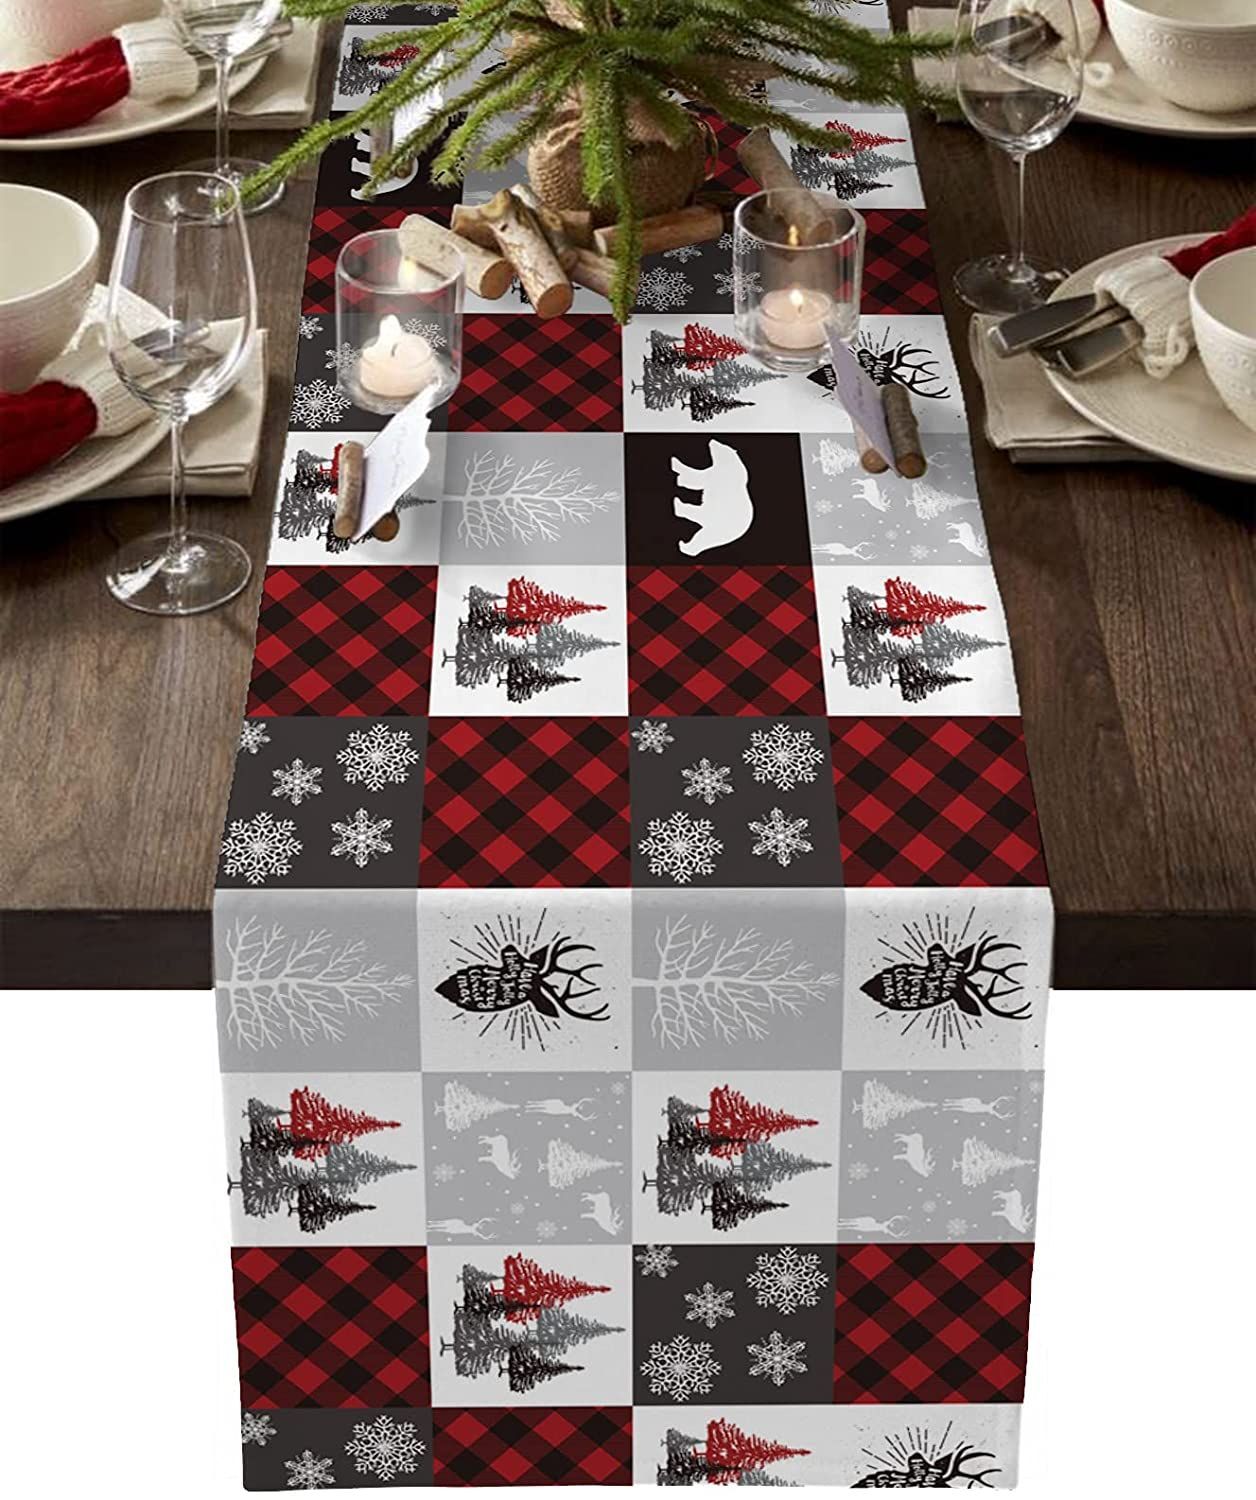 OREZI Red Table Runner for Christmas,Christmas Truck Snowflakes Winter Holiday Table Runner for Wedding Party Family Events Decor,13 x90 Inches,Rectangular